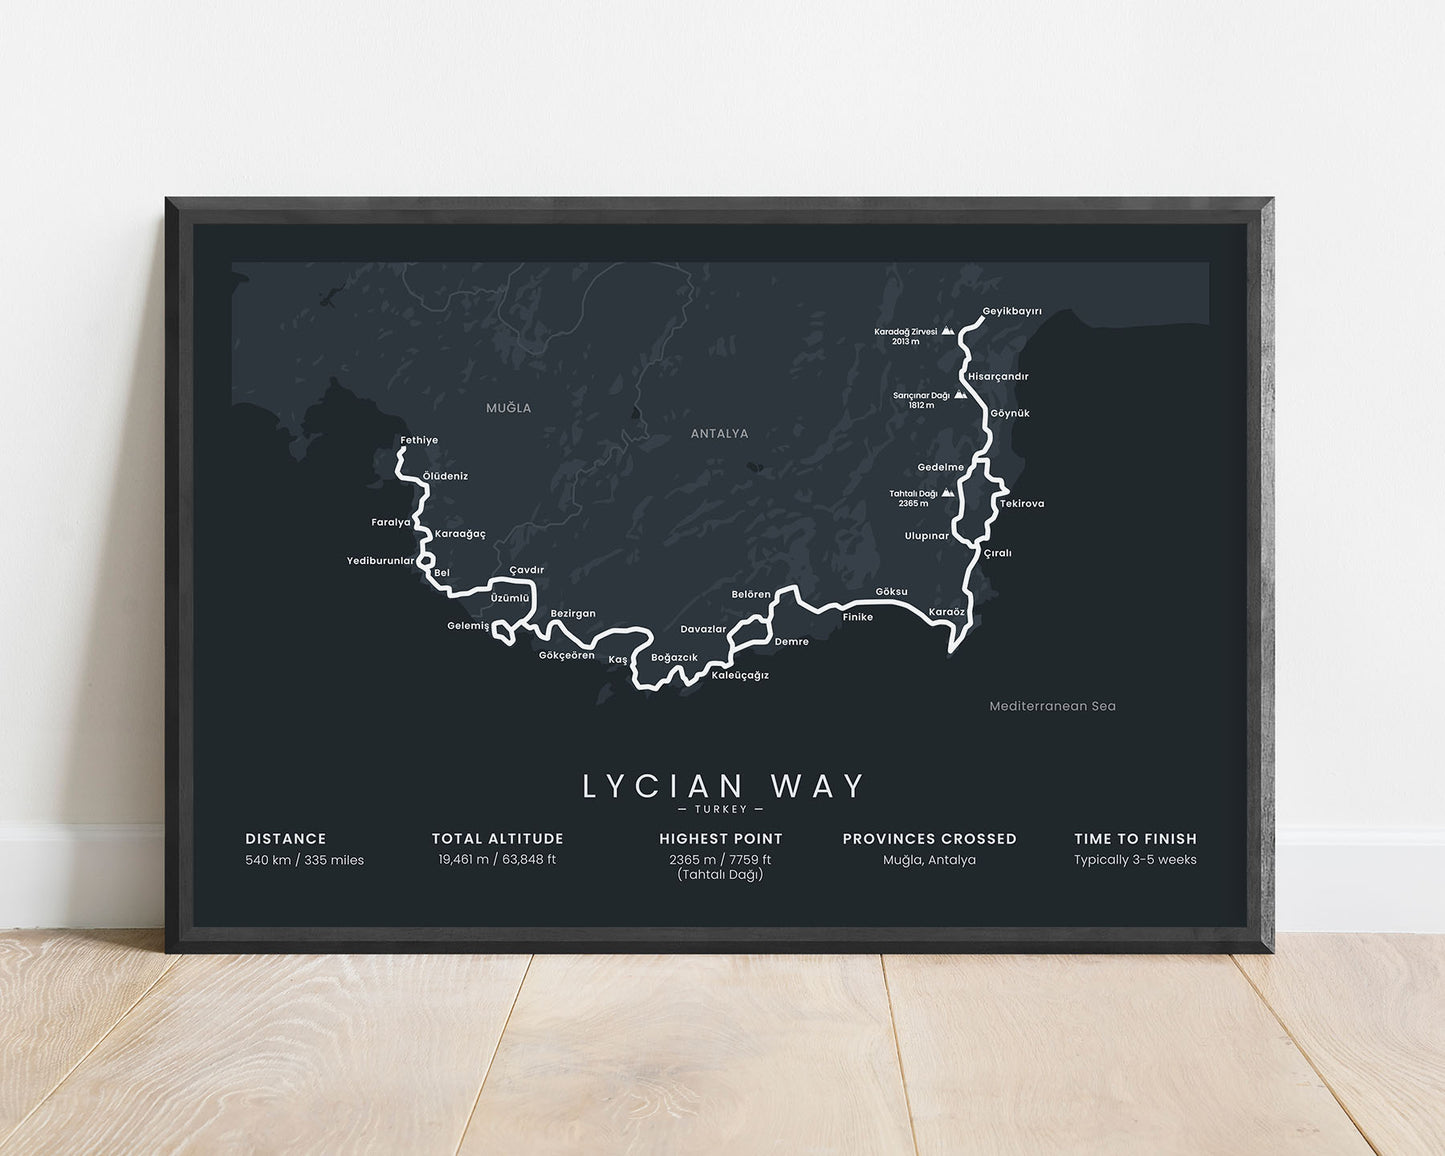 Lycian Way hiking trail in Mediterranean, South Turkey, minimalist map poster with black frame and black background